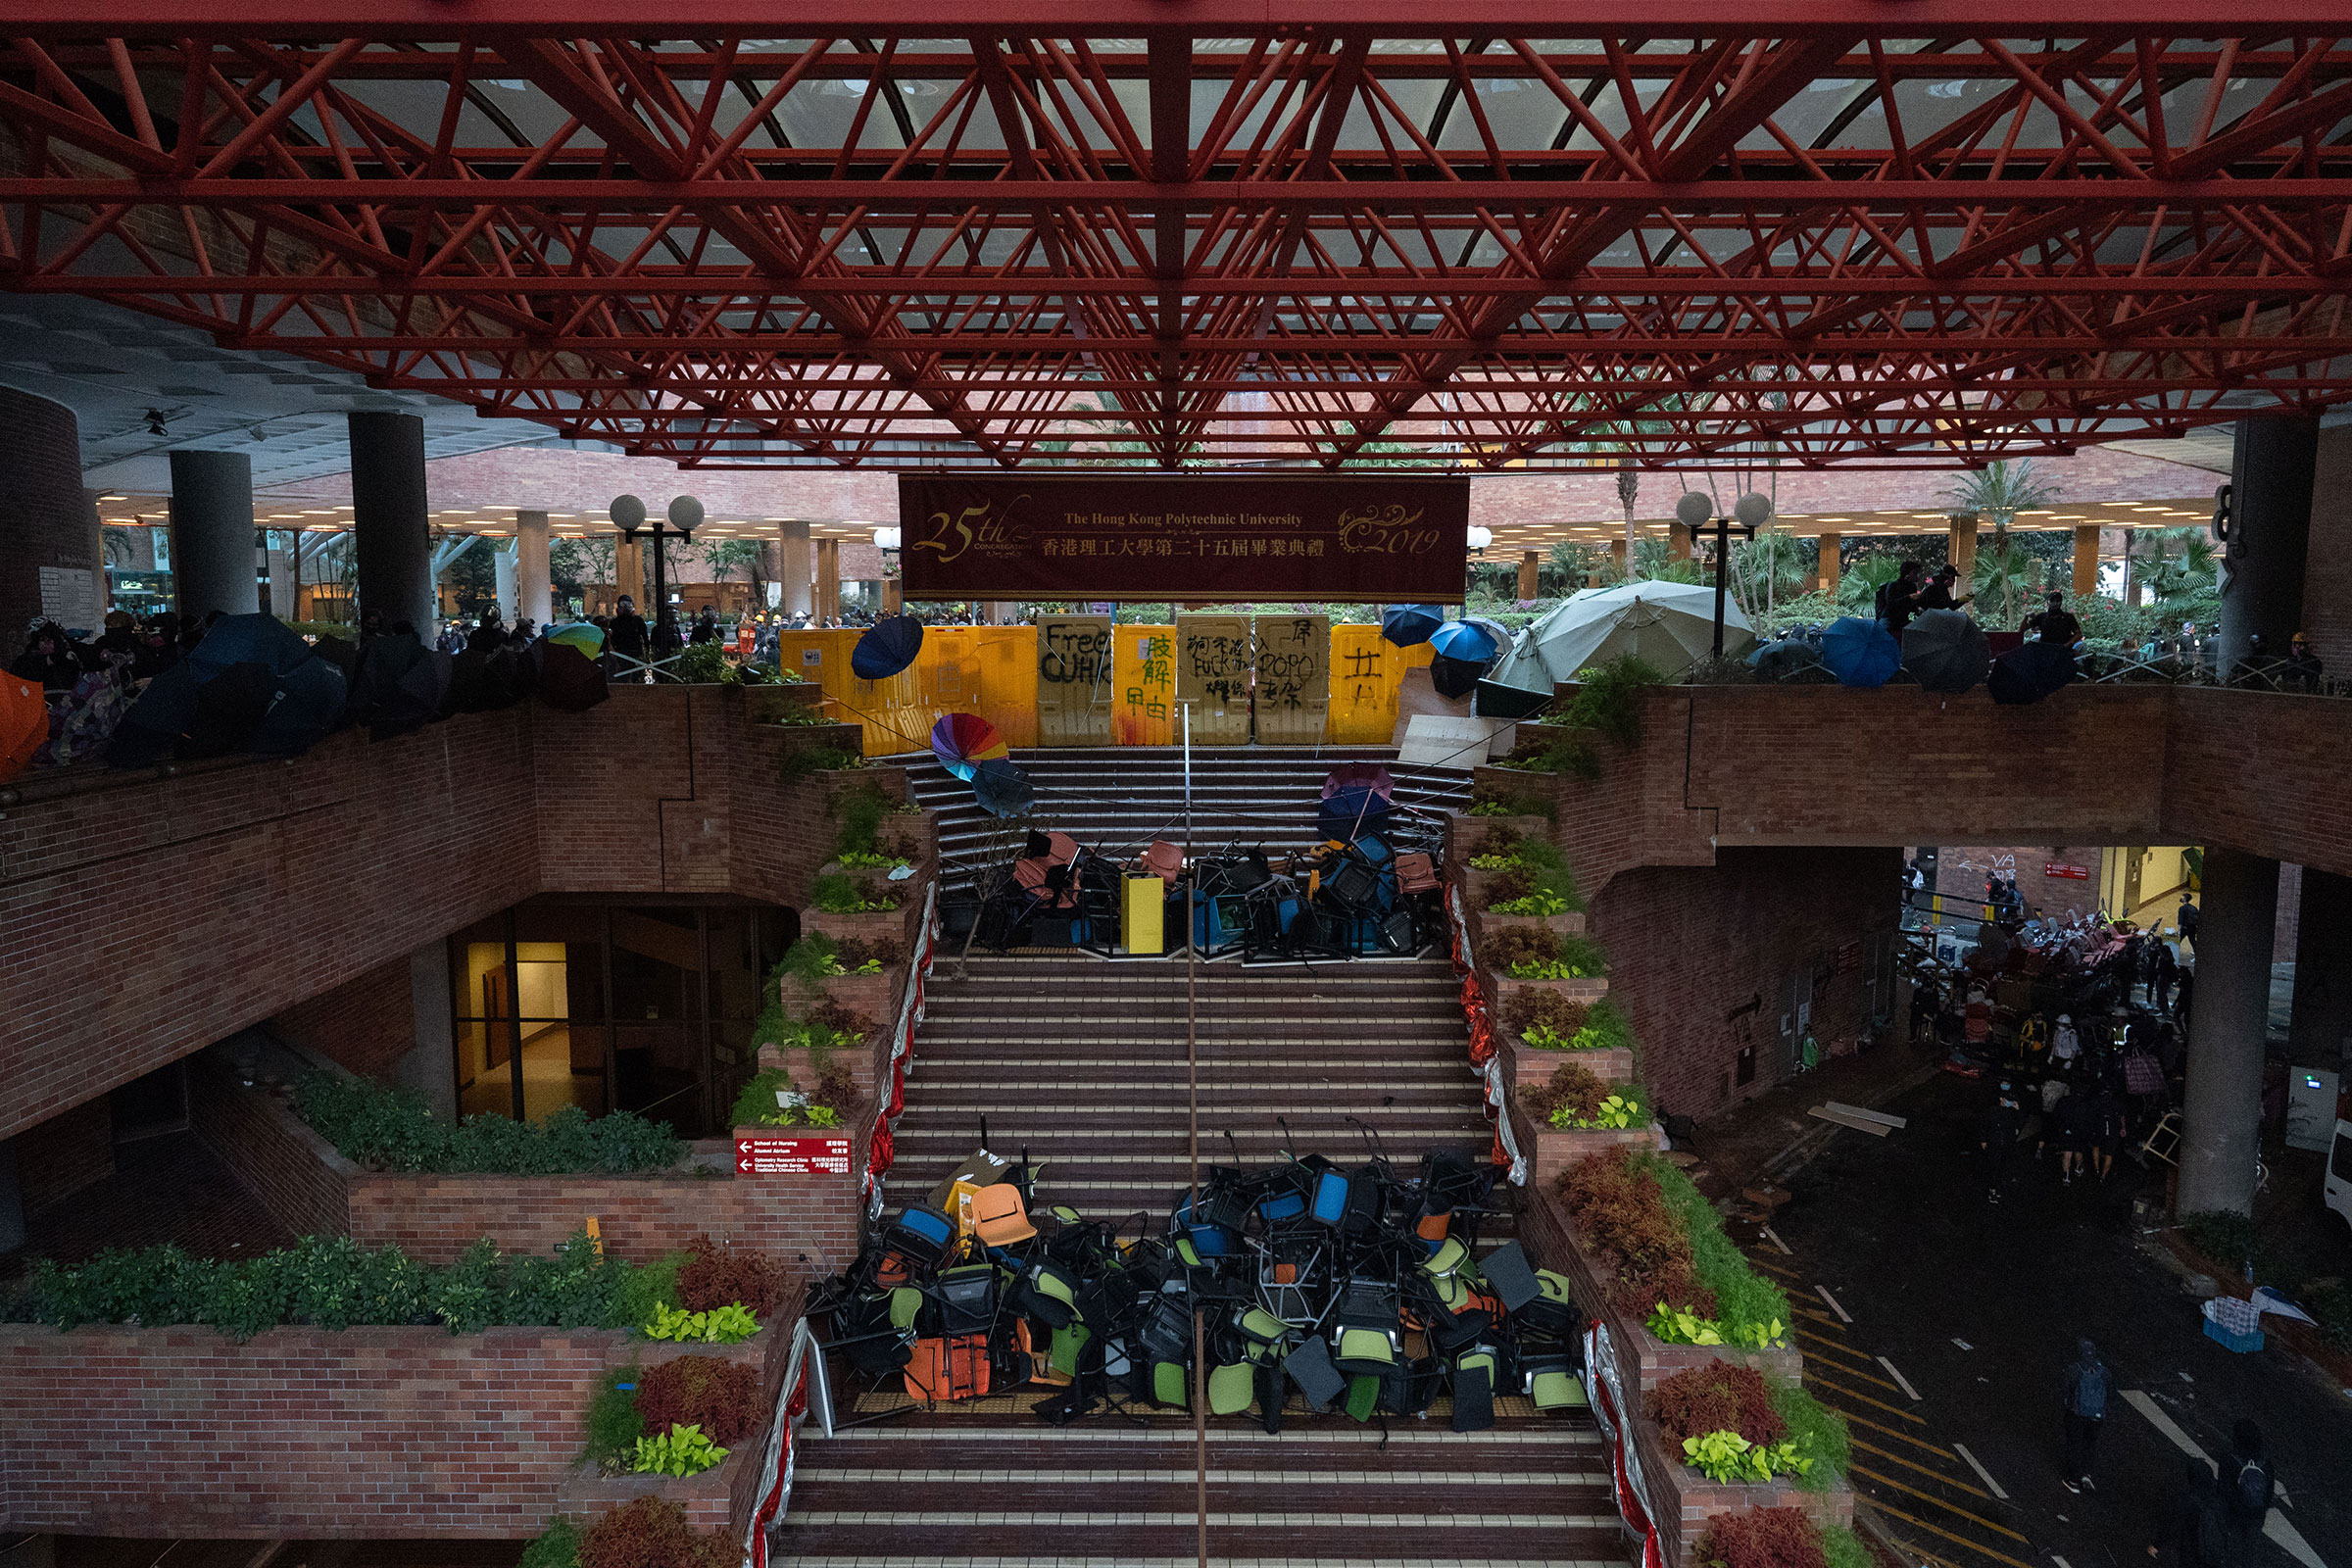 Polytechnic University's main atrium, fortified with umbrellas and barricades, Nov. 14.